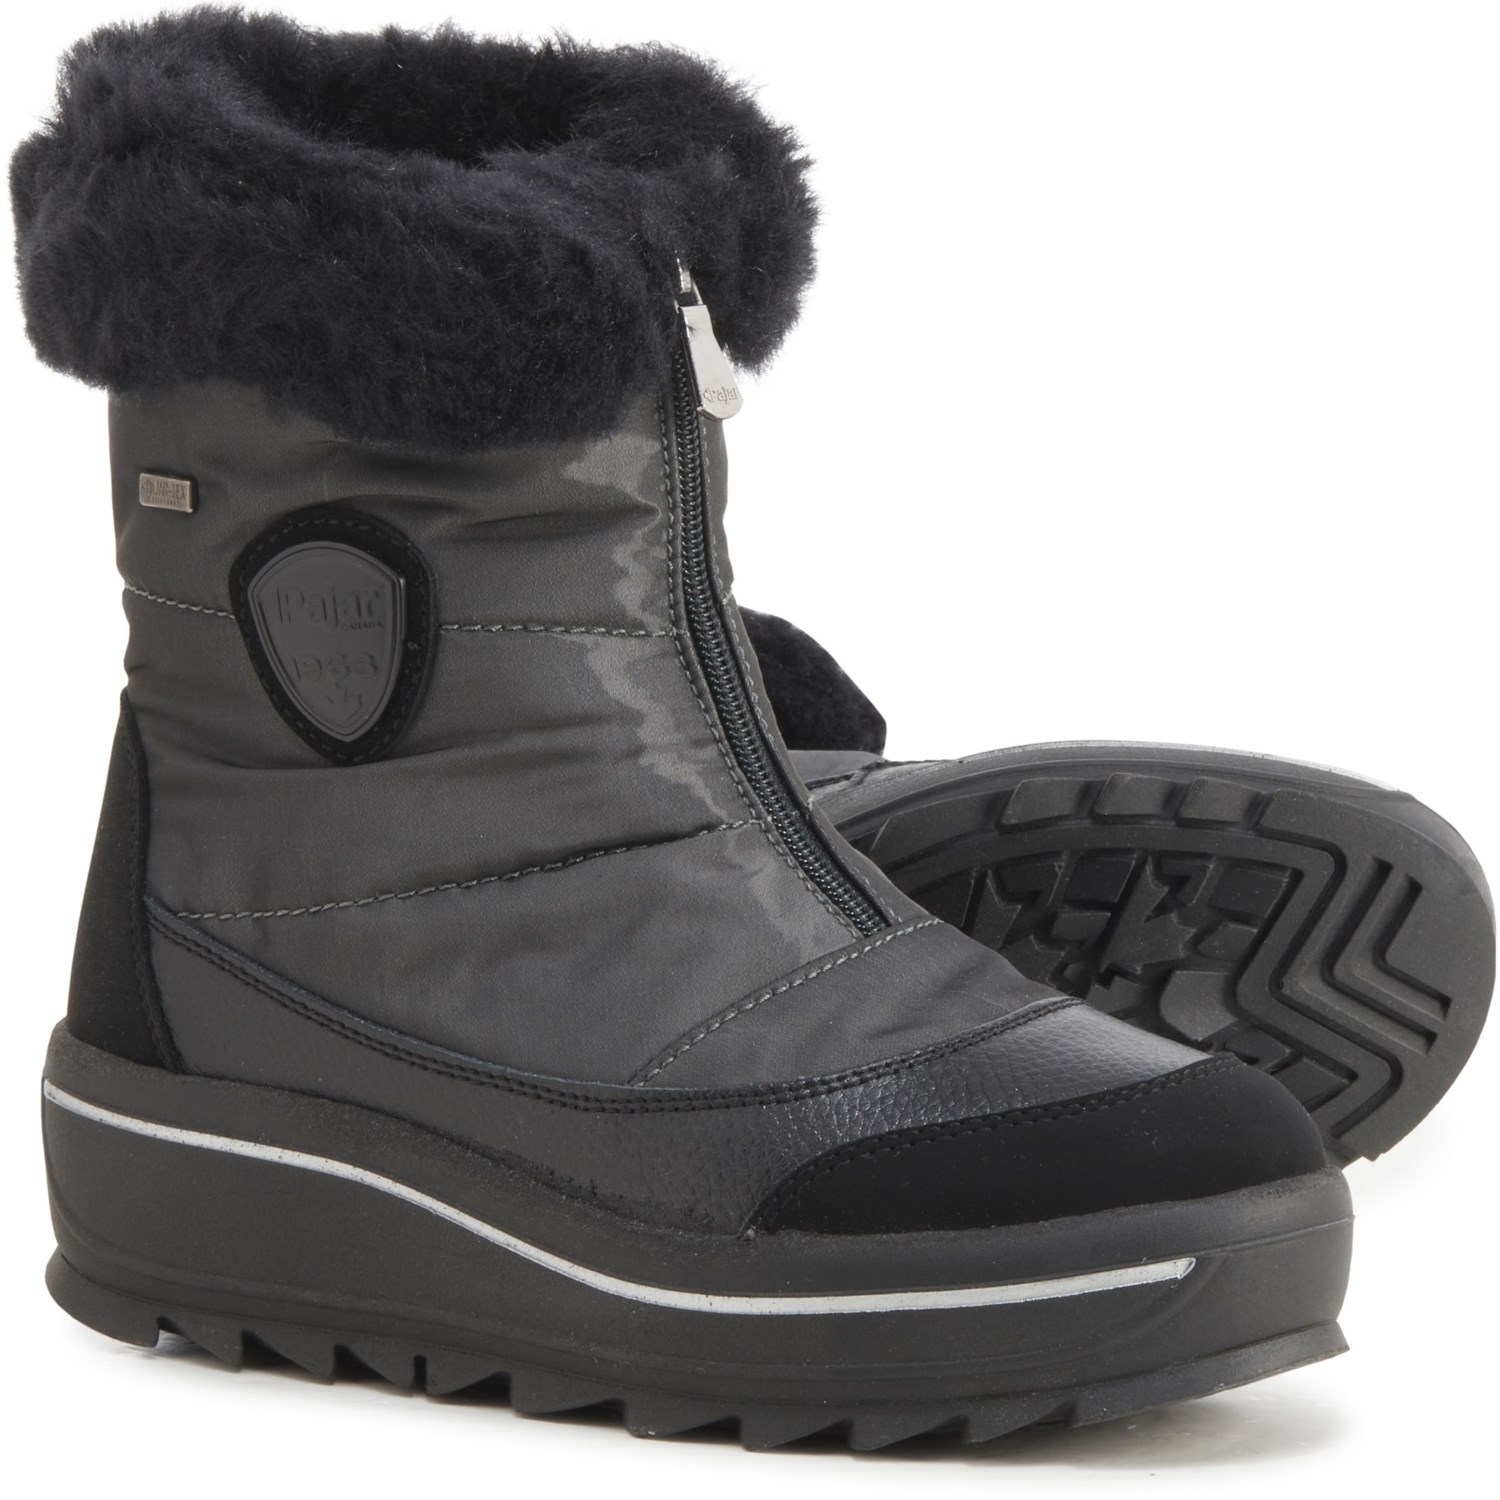 Pajar Made in Europe Temoen Winter Boots (For Women) - Save 60%